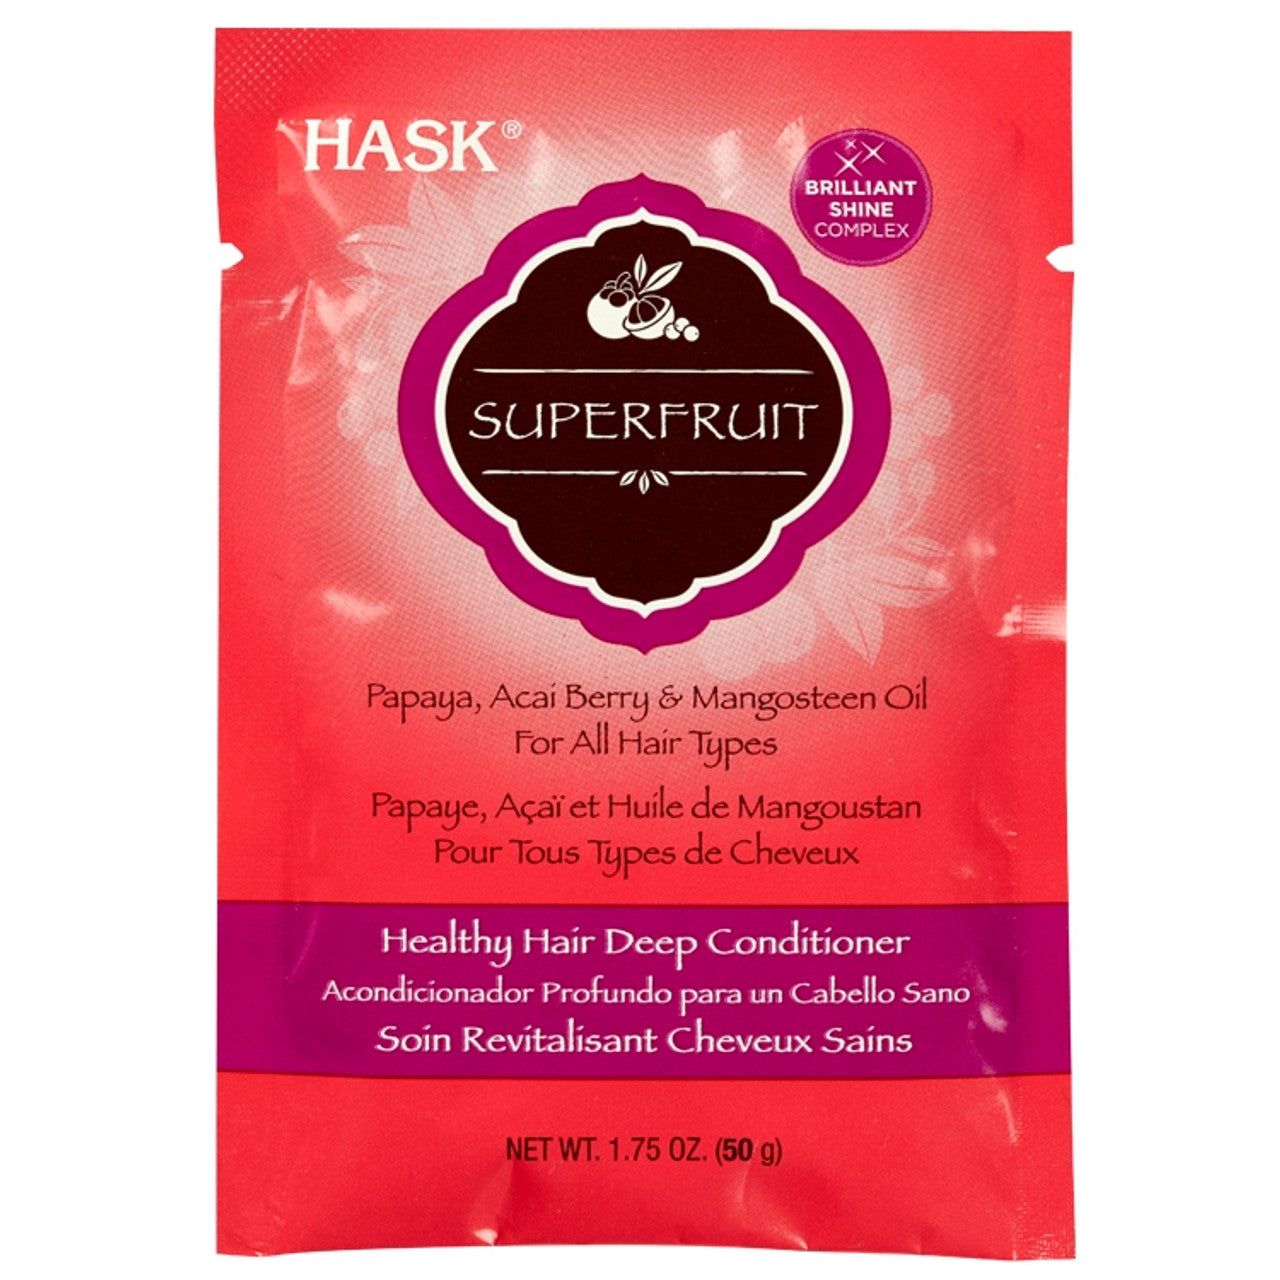 Hask Superfruit Healthy Hair Deep Conditioner Packet 1.75oz